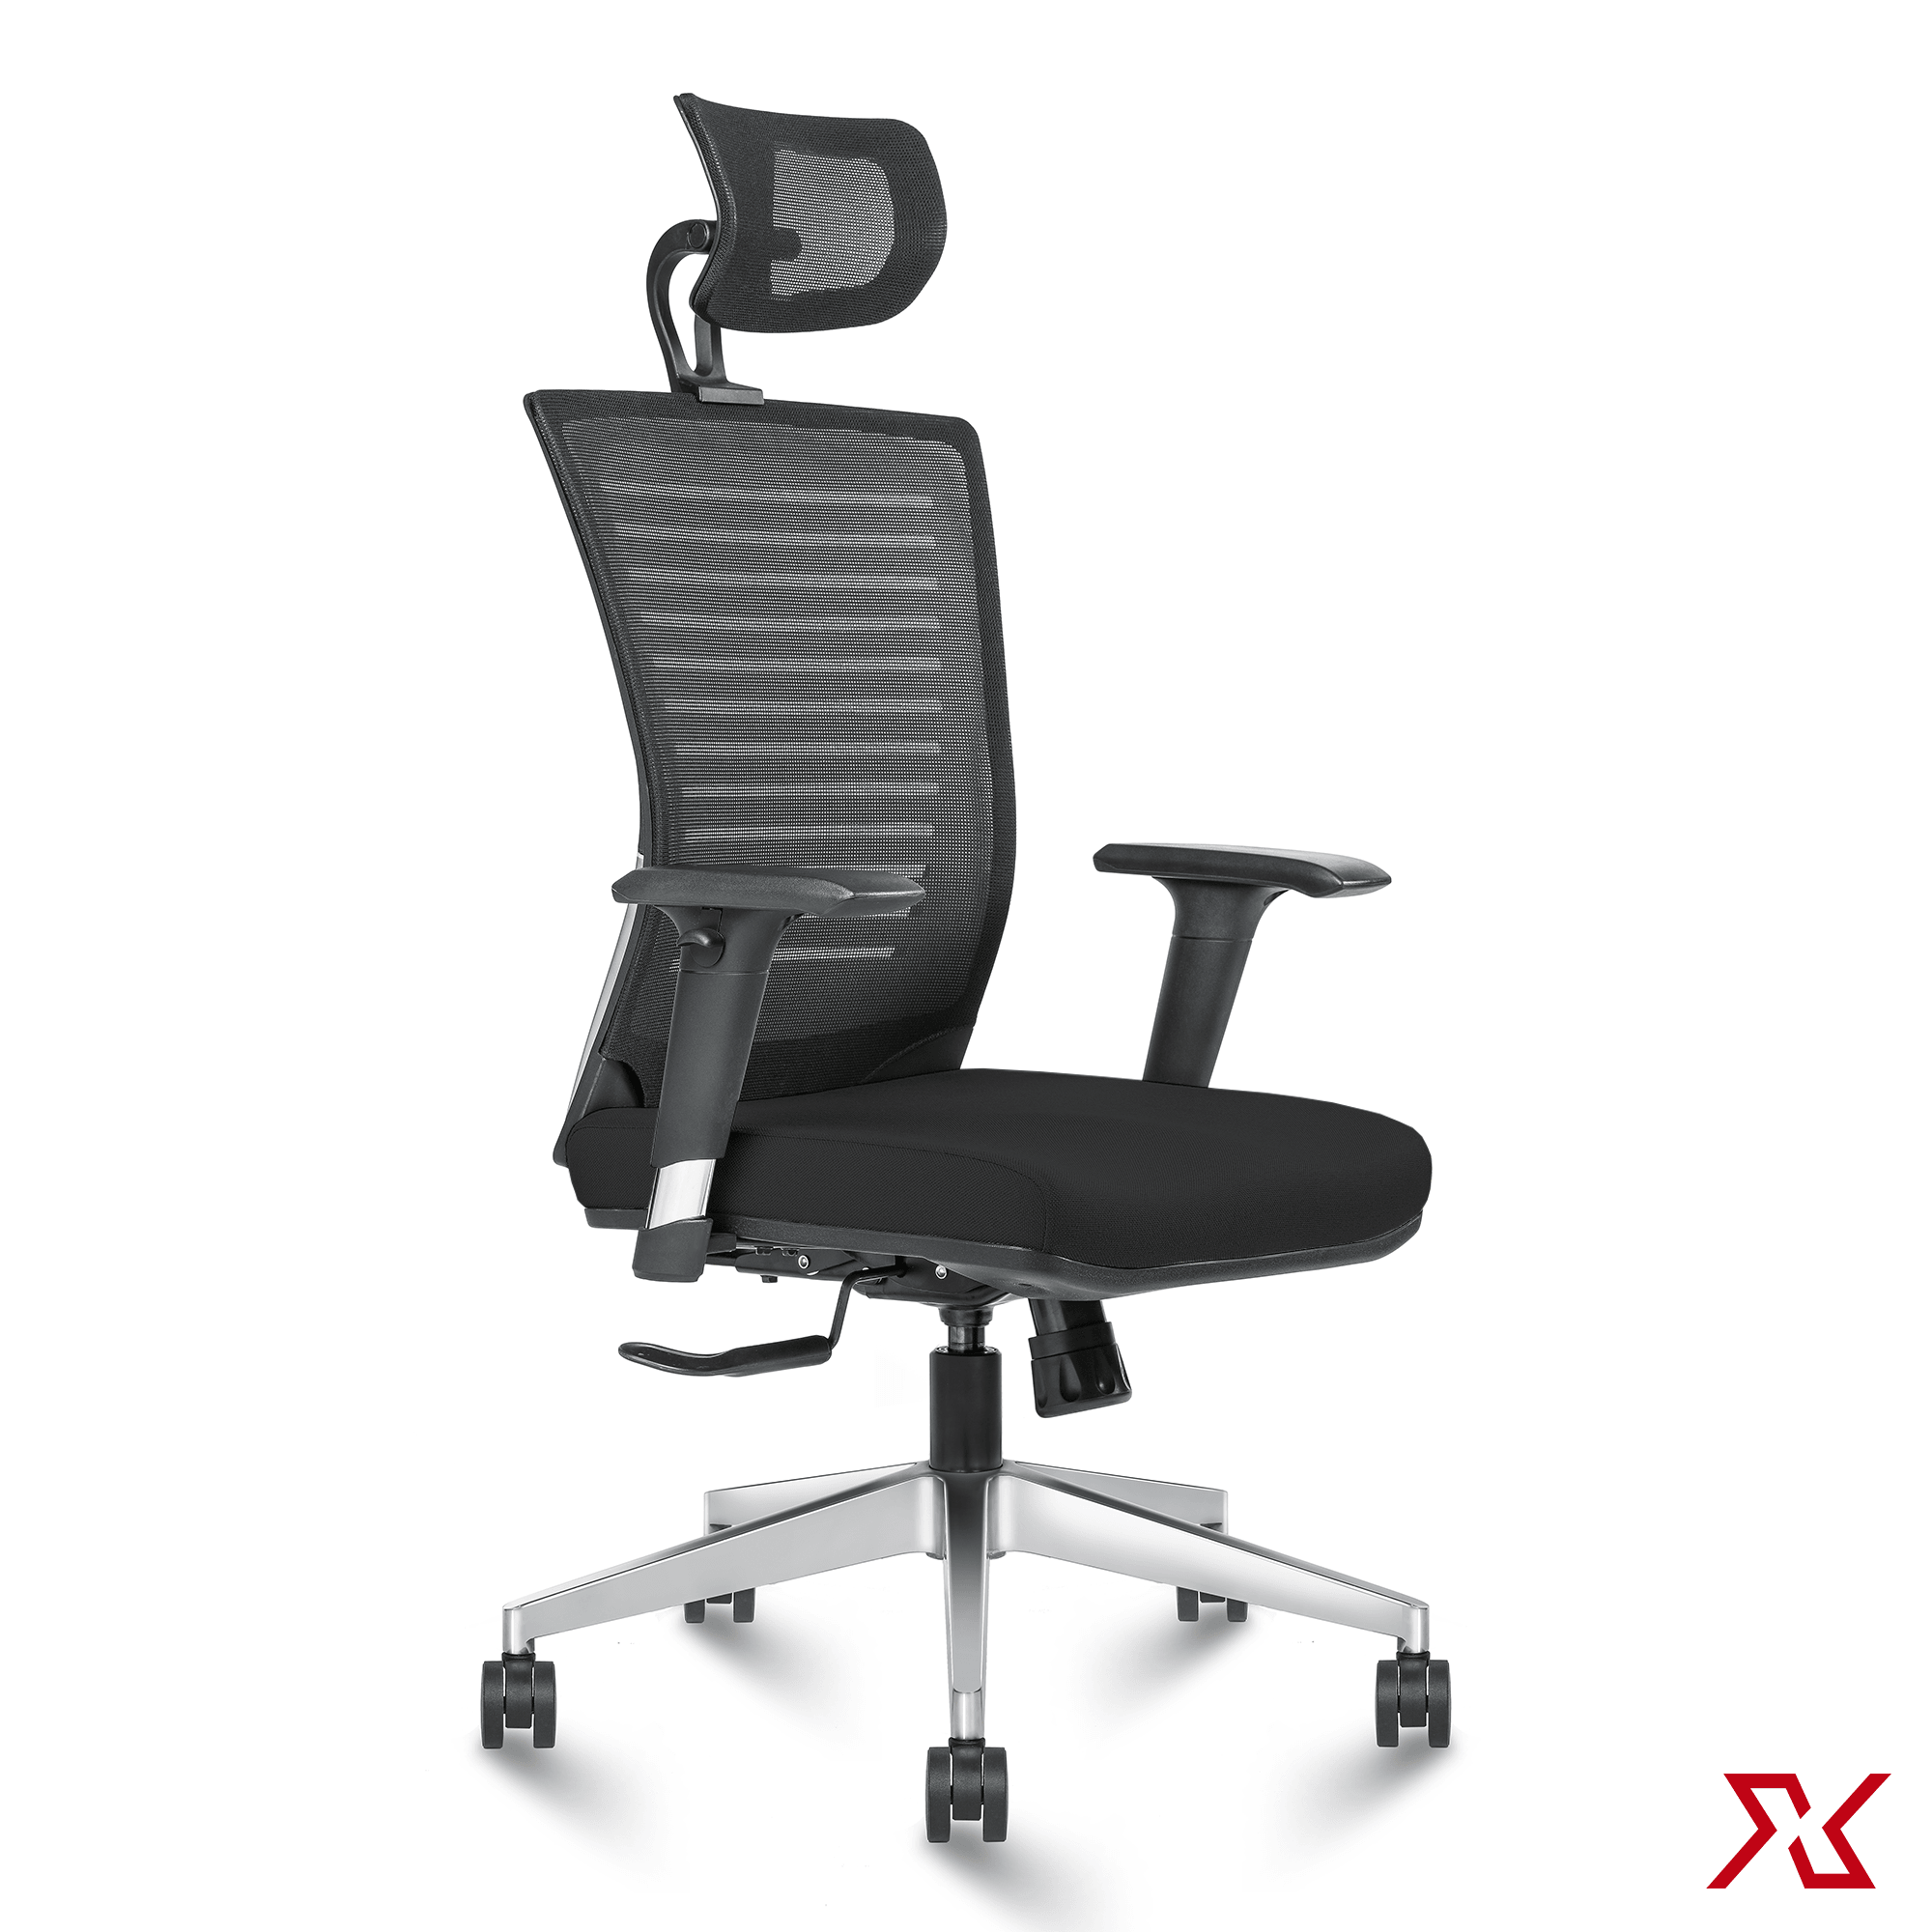 VINO High Back Max (Black Chair) - Exclusiff Seating Sytems